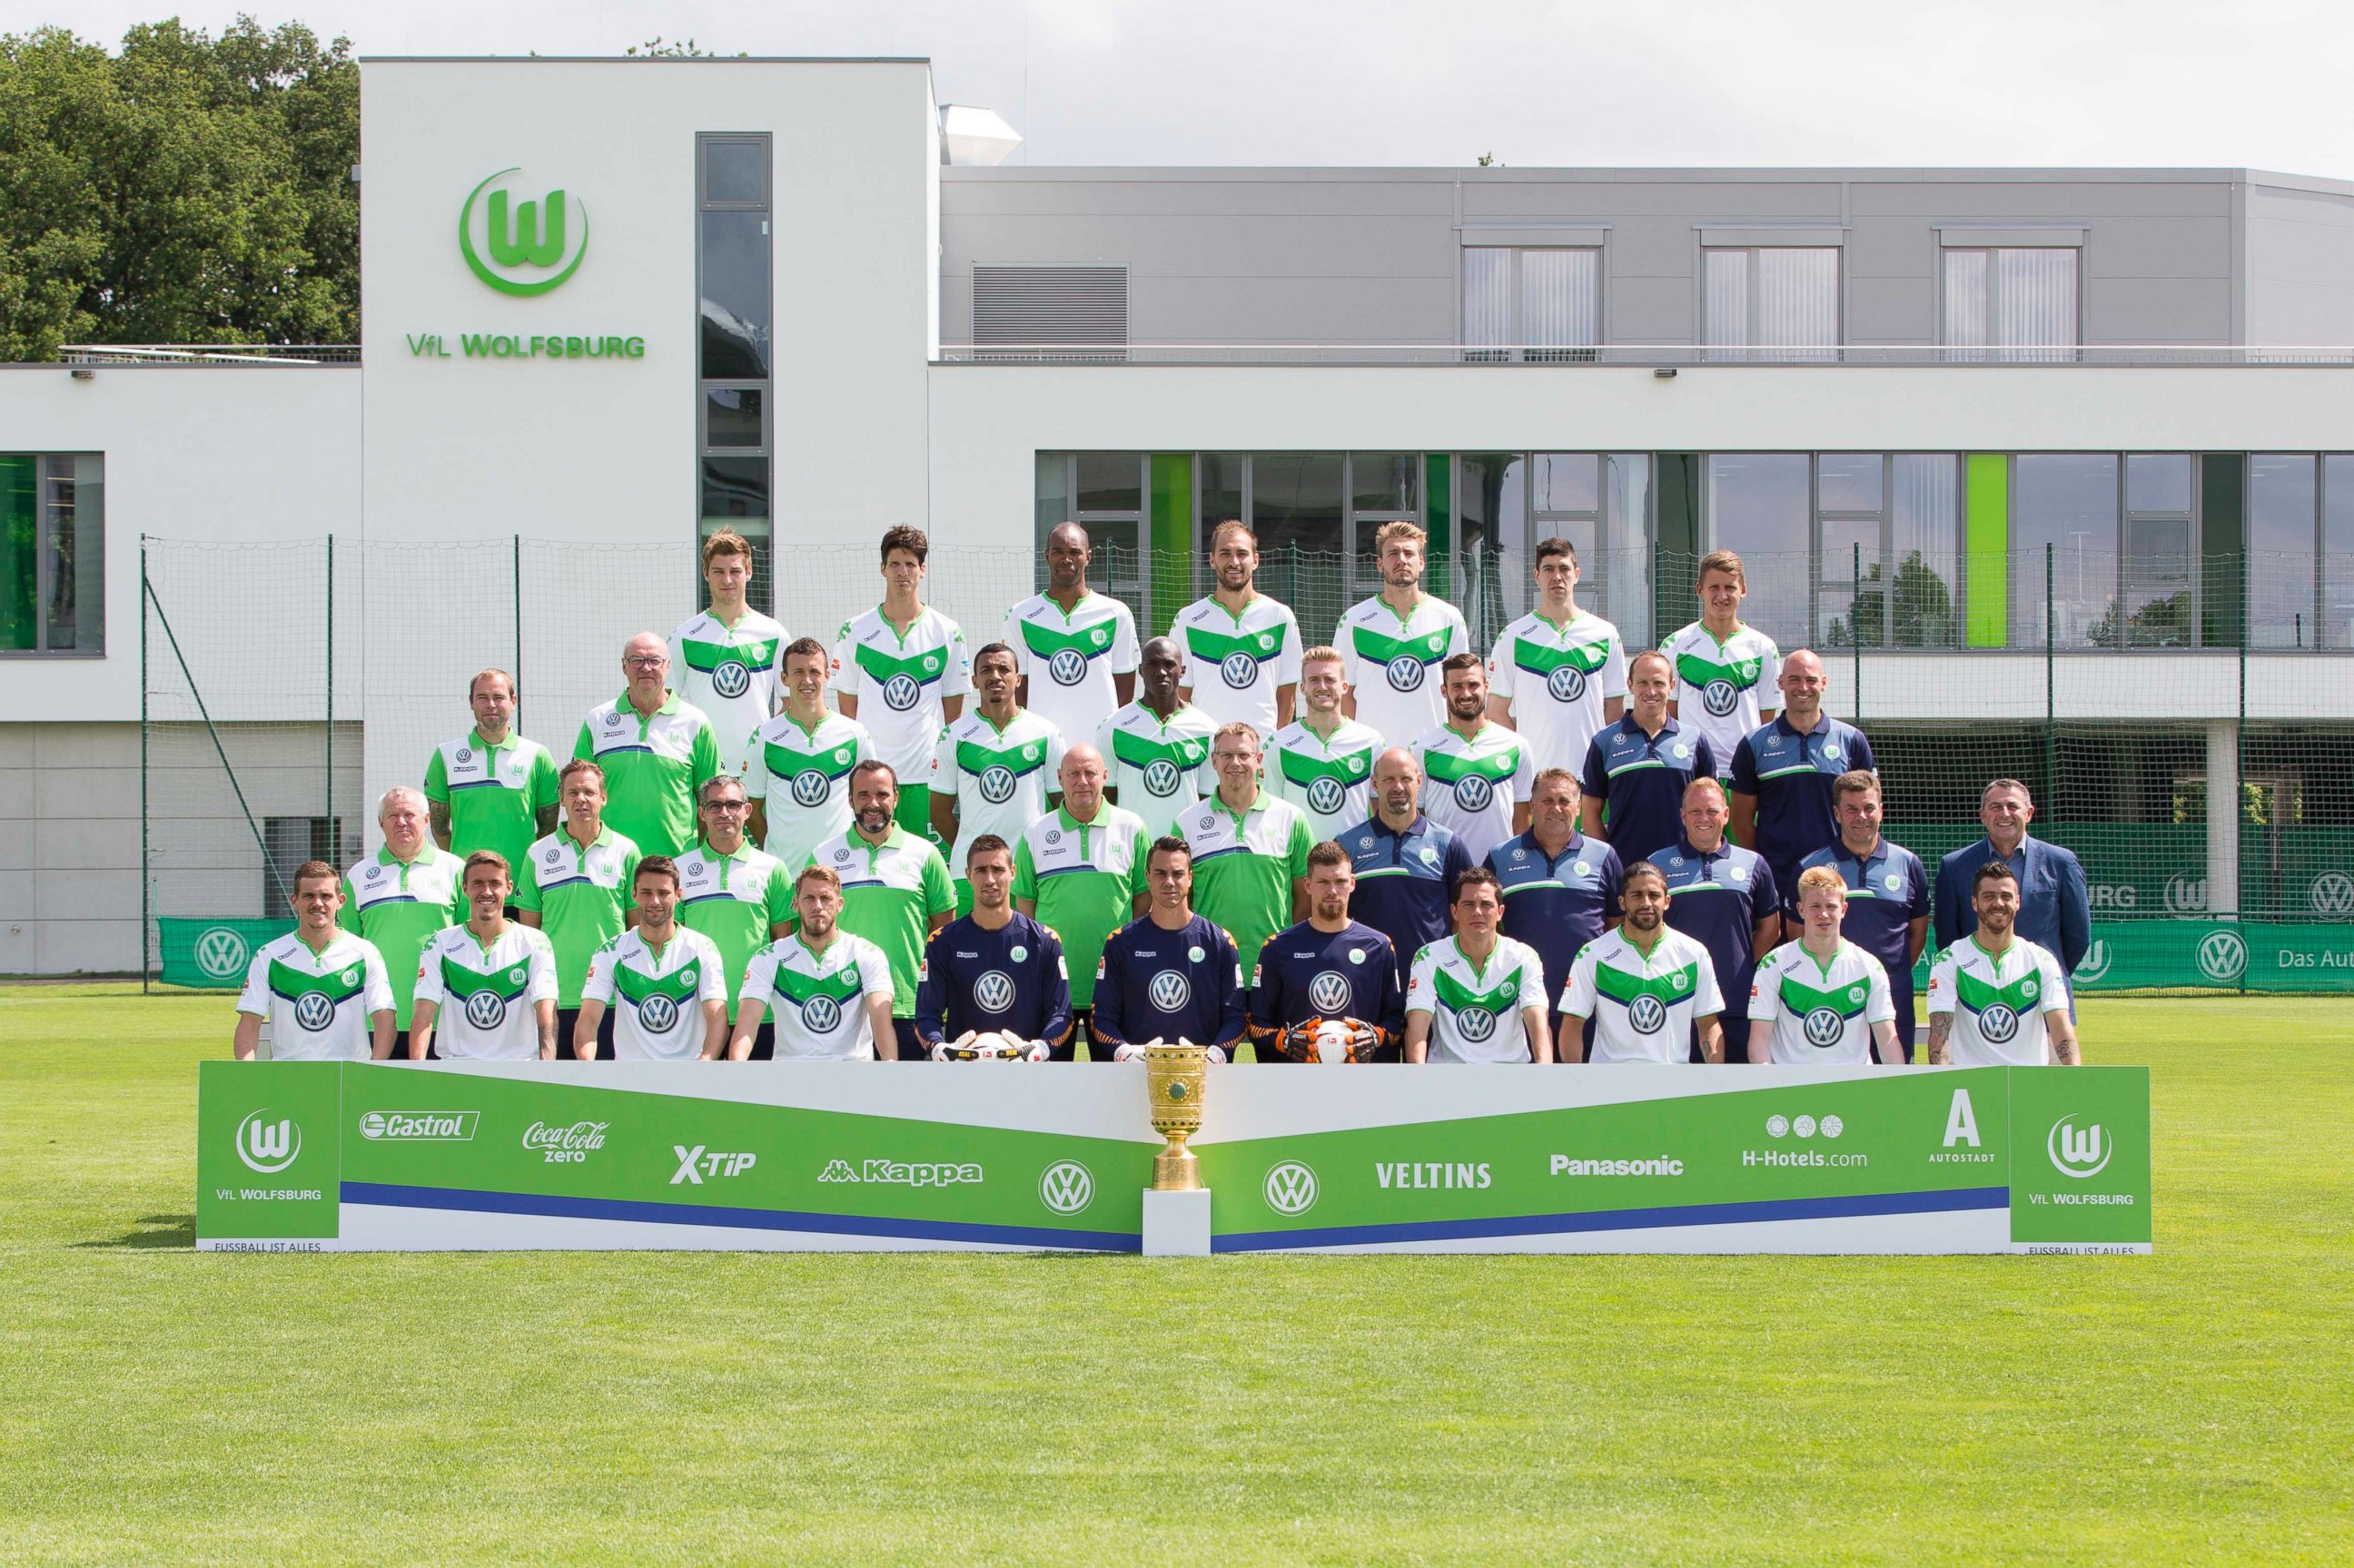 PHOTO: VfL Wolfsburg soccer team is seen posing for a group photo at Volkswagen Arena, July 16, 2015, in Wolfsburg, Germany. 